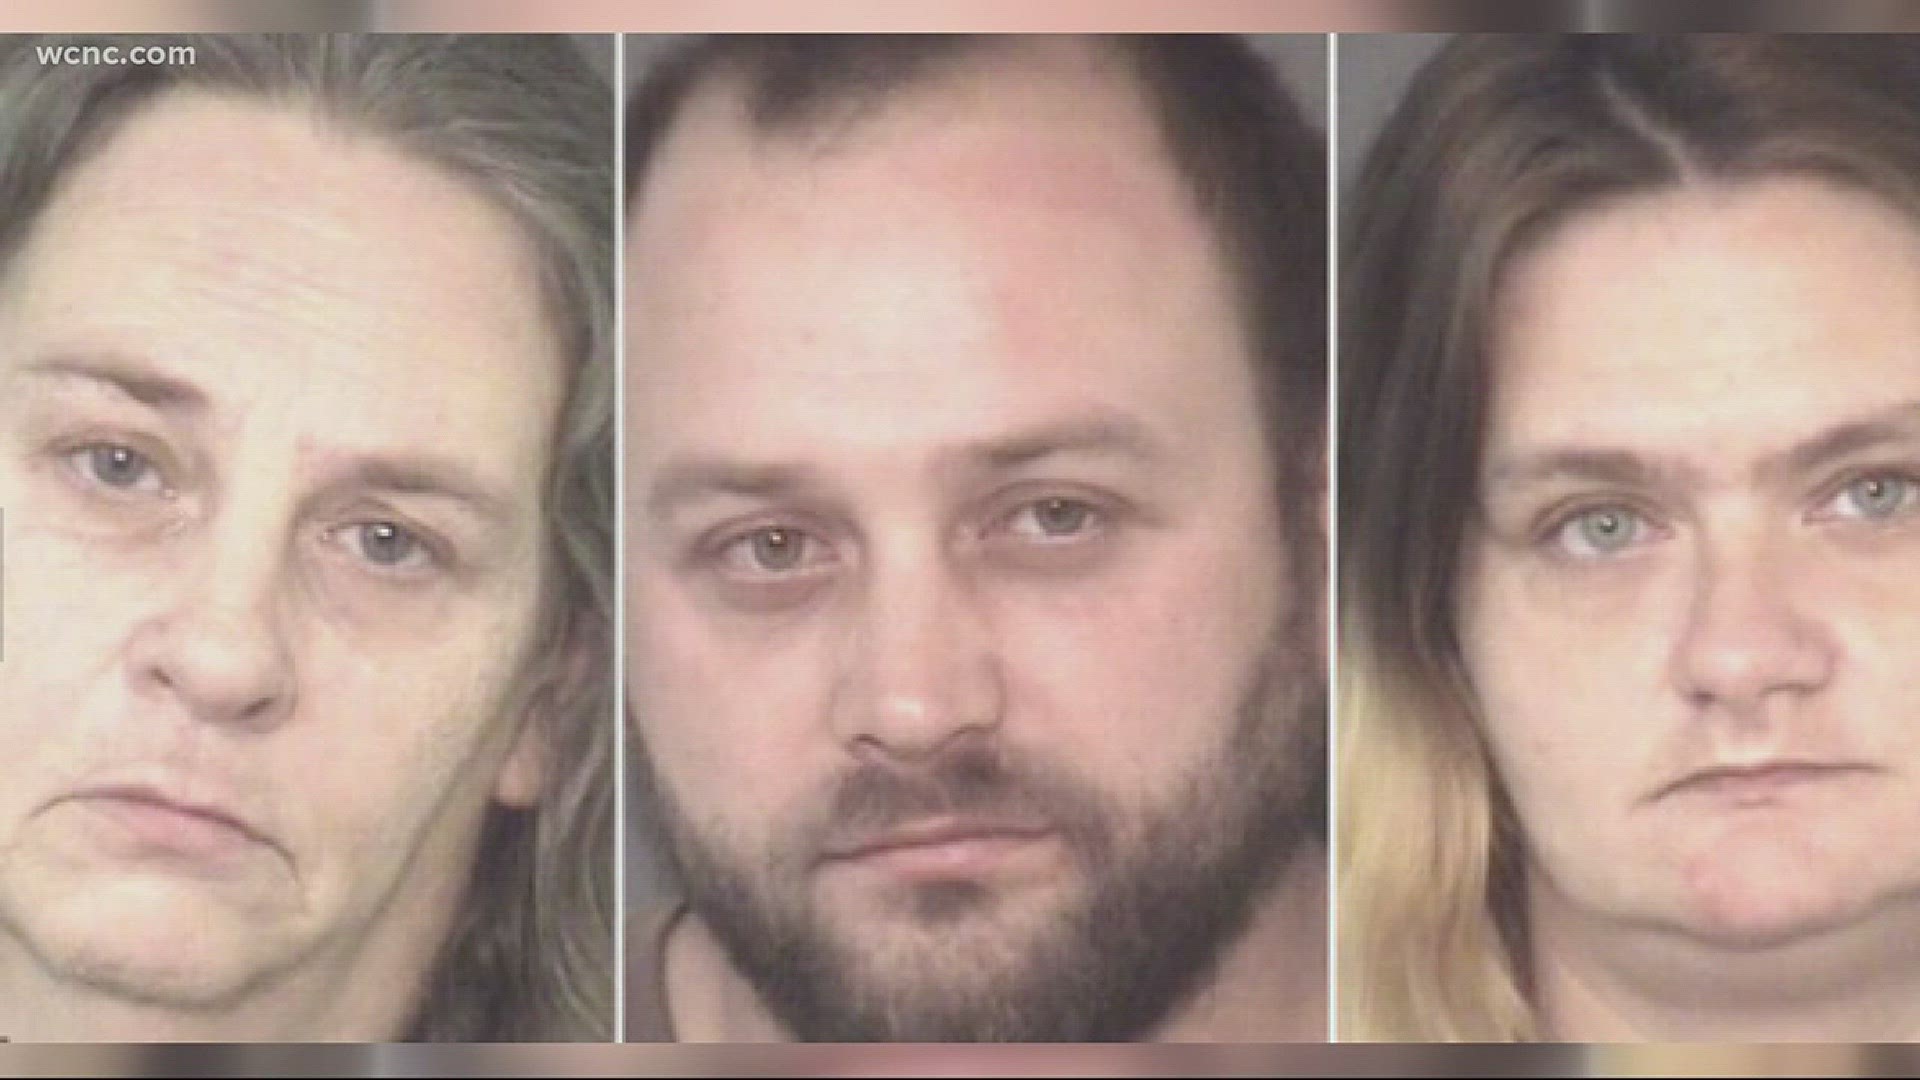 Three people have been arrested in connection with the violent assault and robbery that left an elderly man in critical condition Saturday night in Union County.